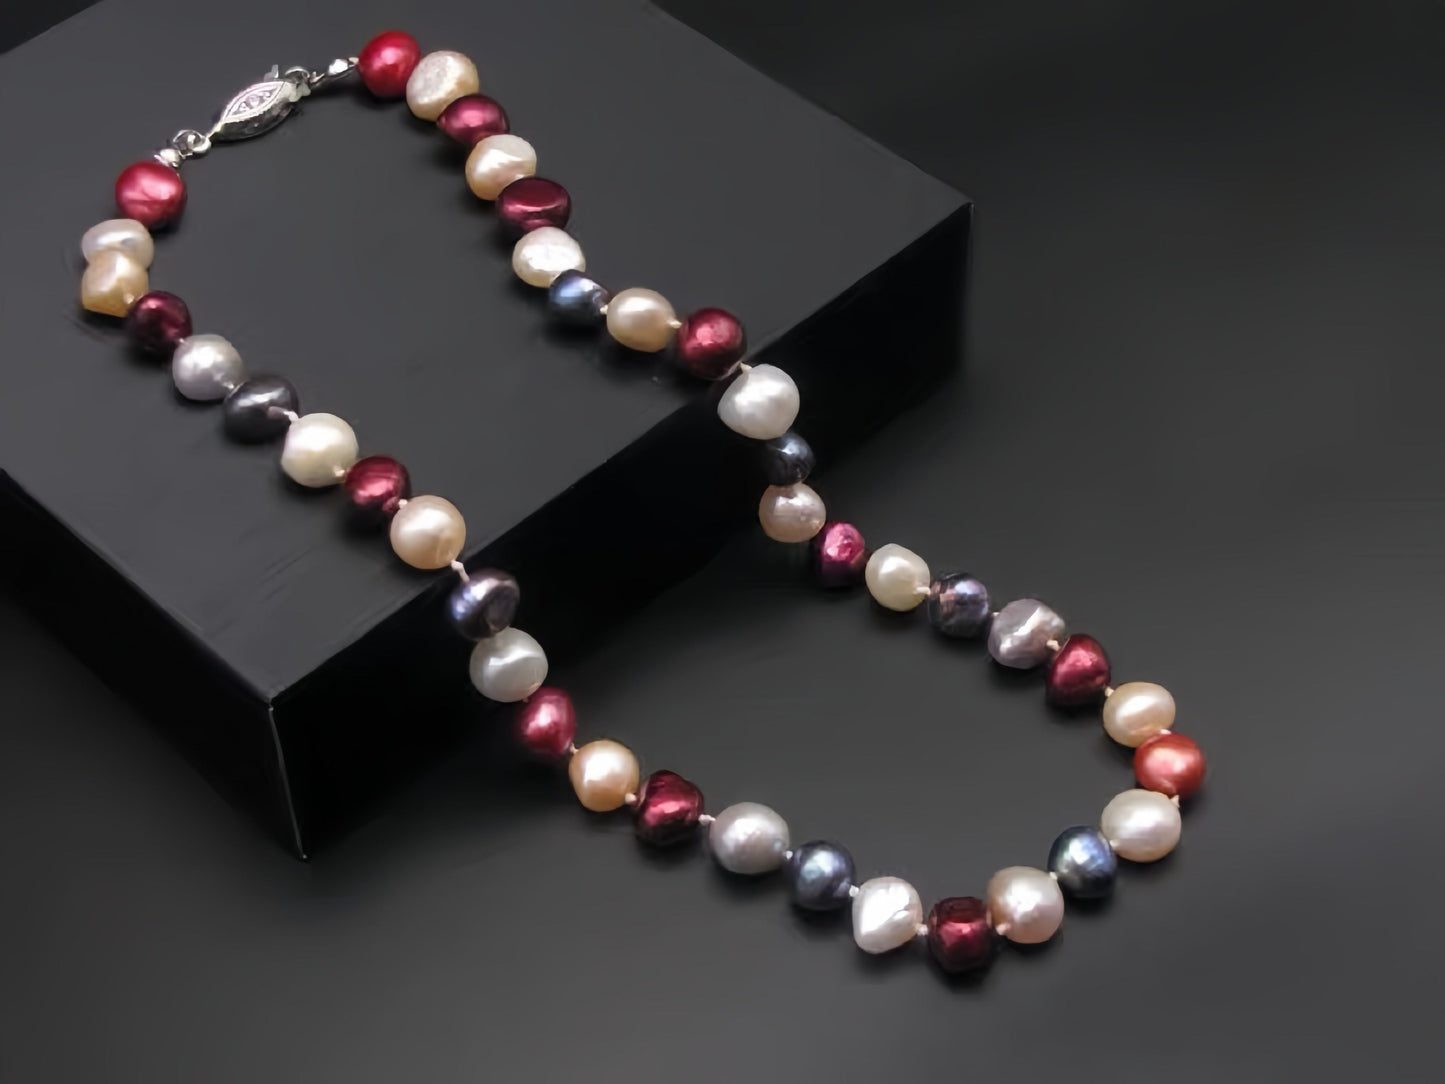 Dyed Natural Pearl Necklace from SHOPQAQ